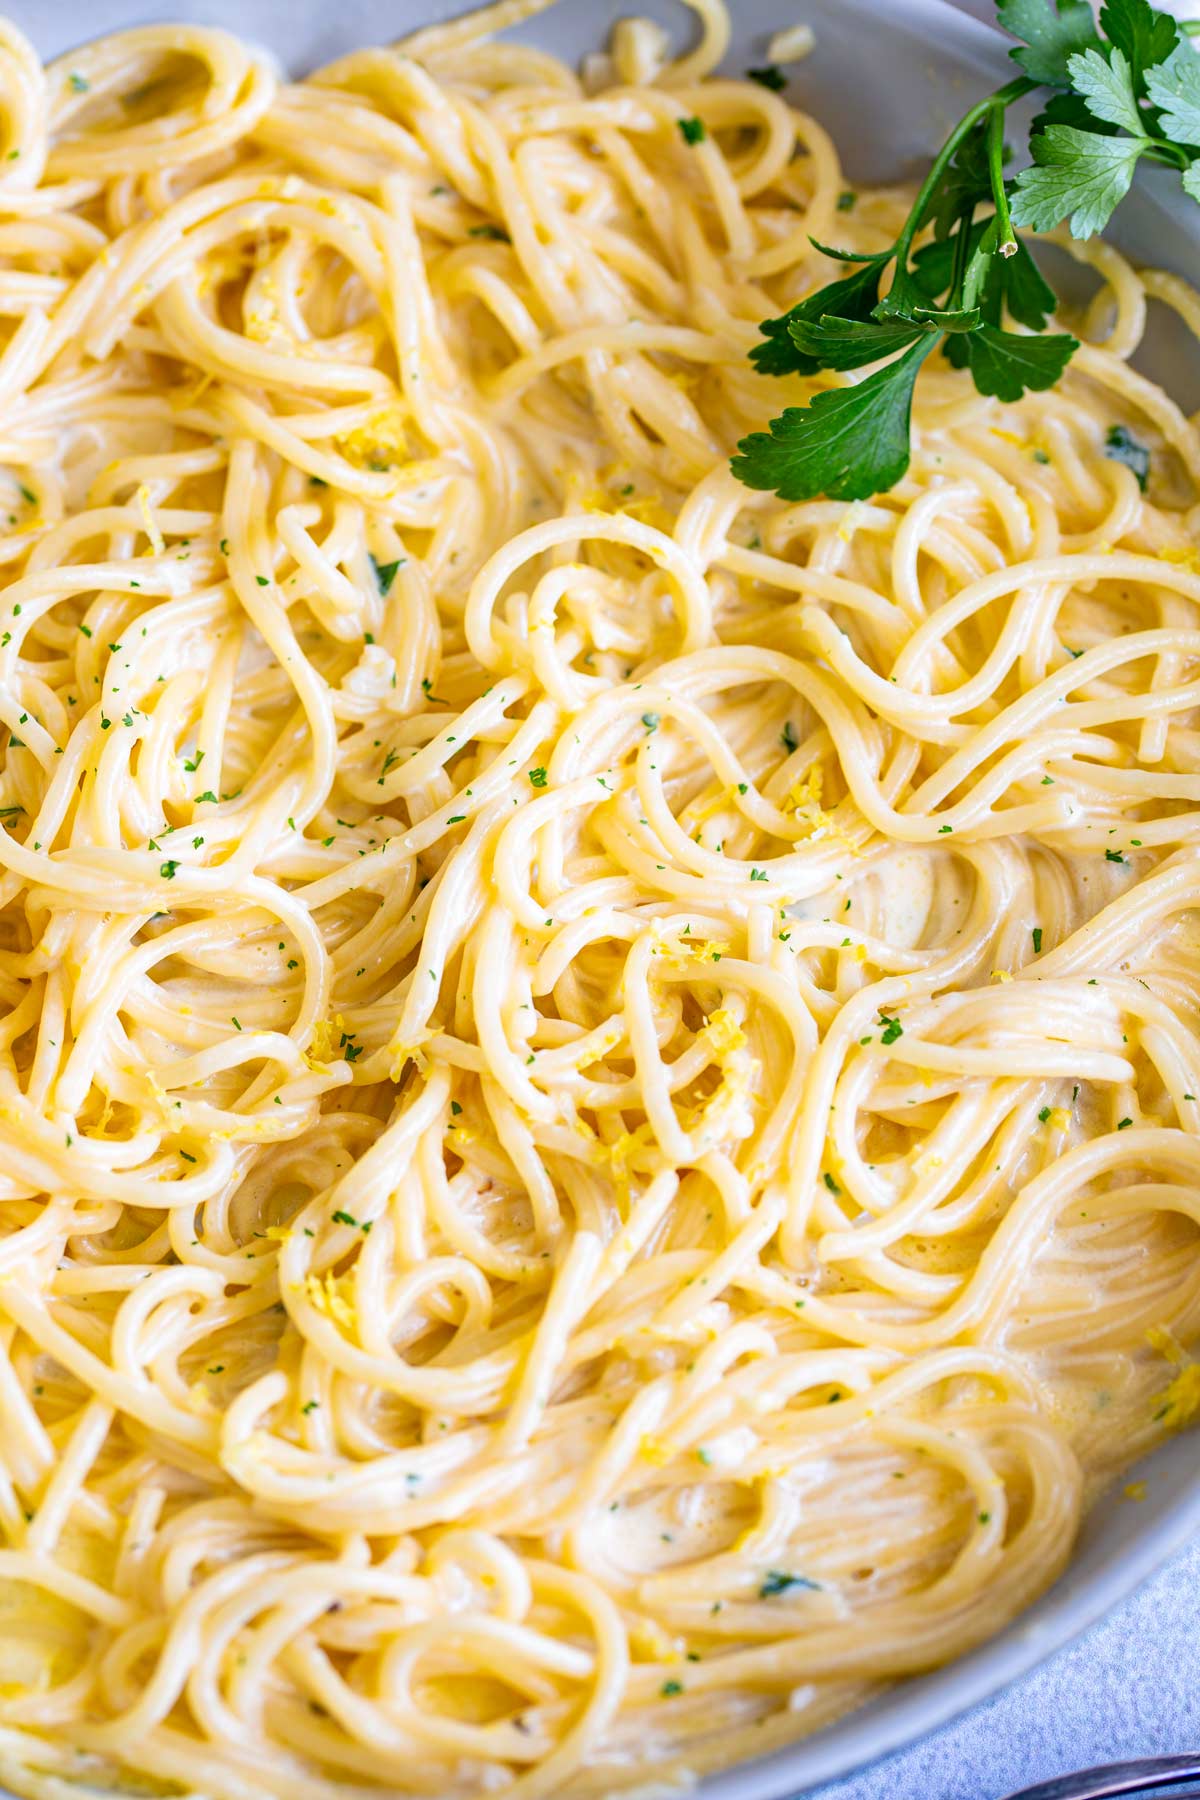 Close up of spaghetti in a creamy sauce with parsley and lemon zest garnish